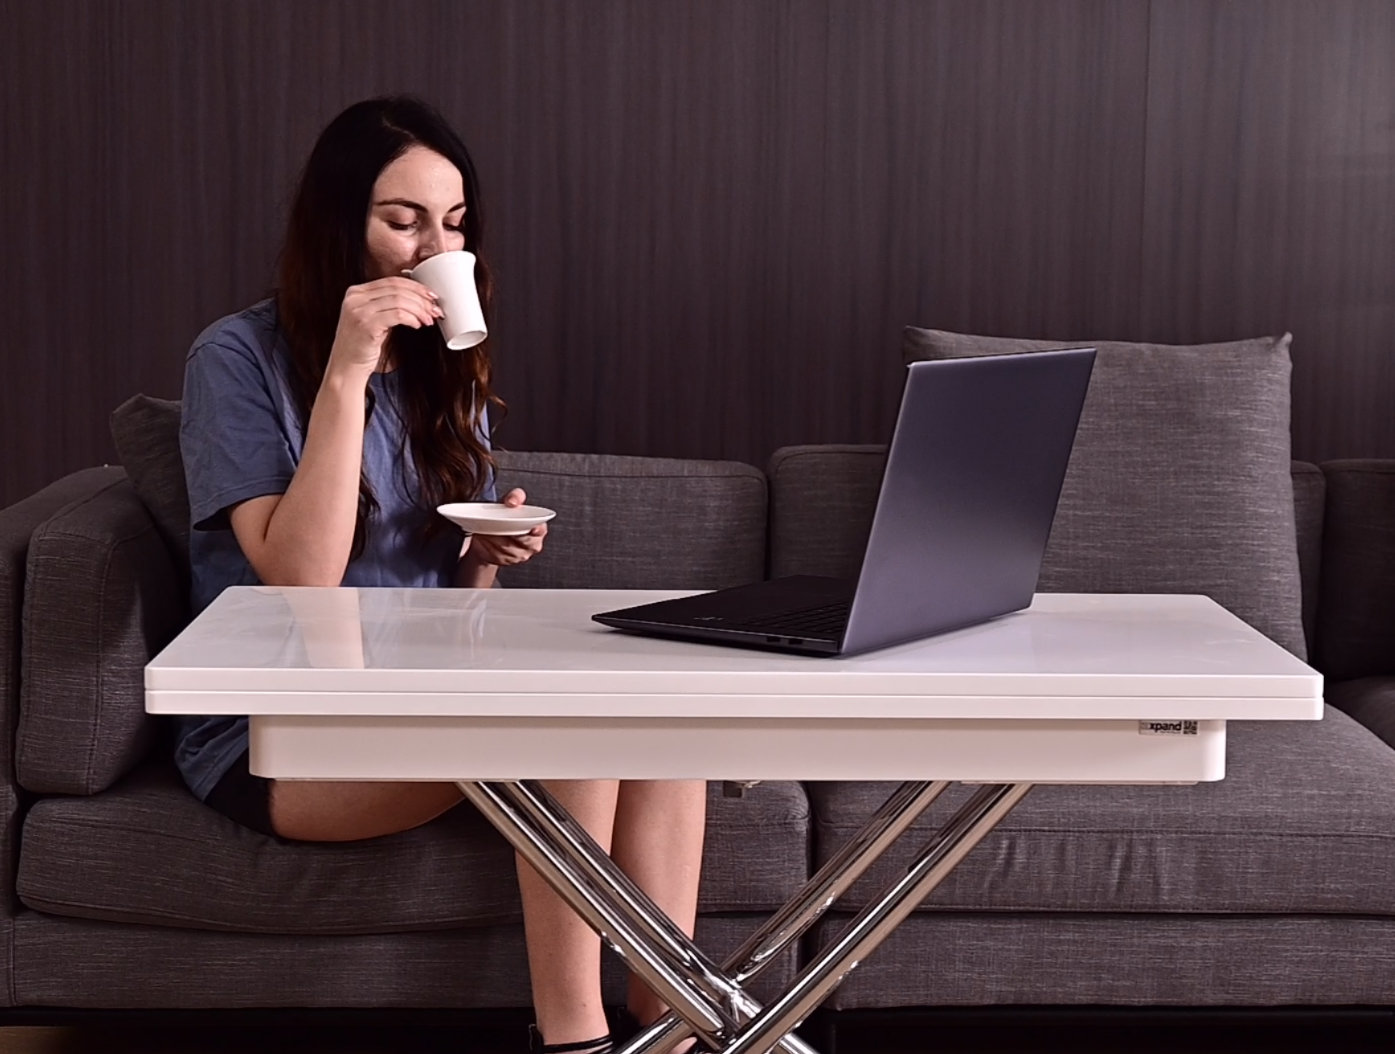 Coffee transforming table is height adjustable for work at the couch